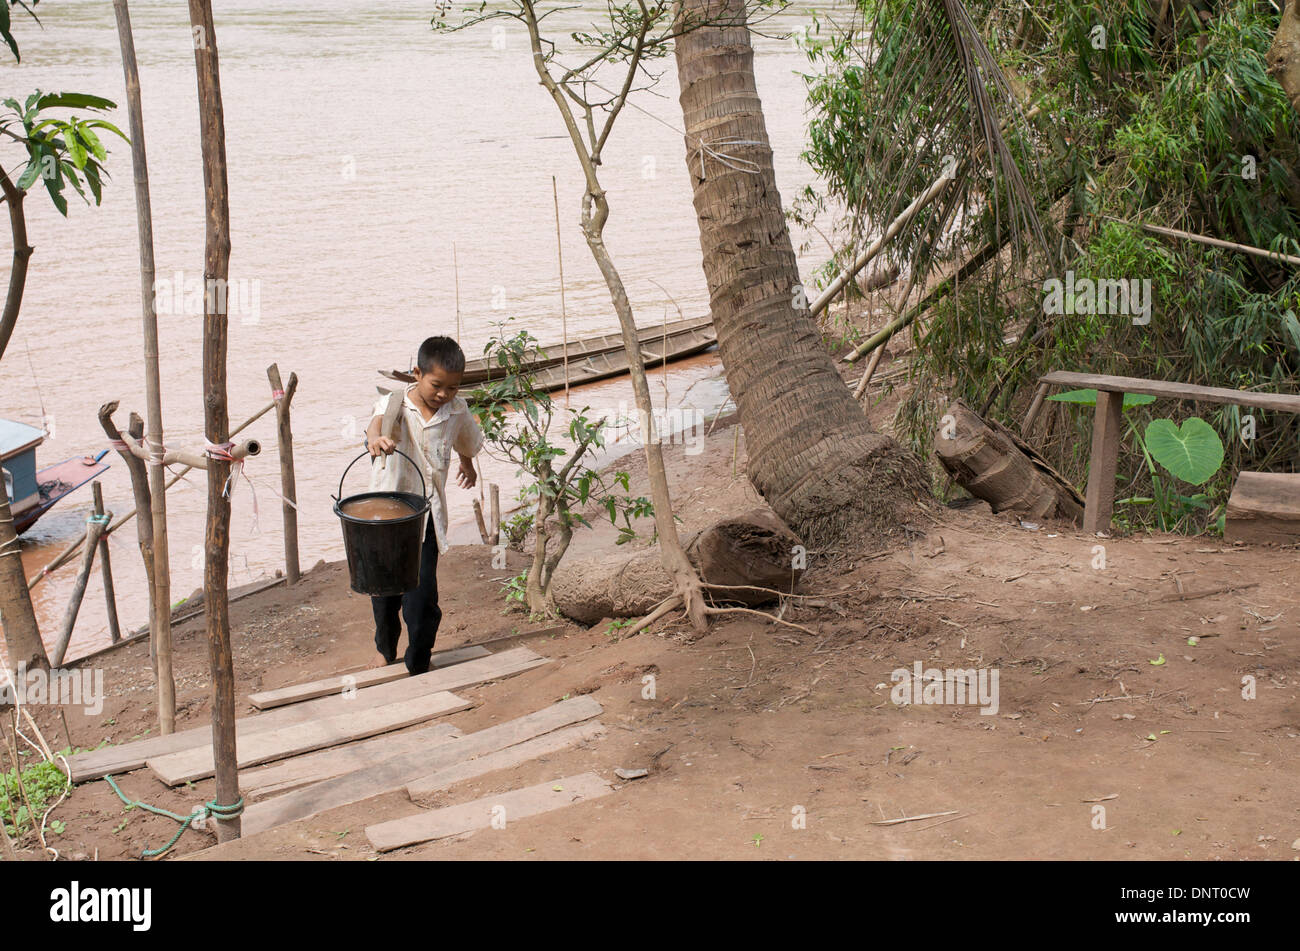 Young boy carrying water by the Mekong River in Laos Stock Photo